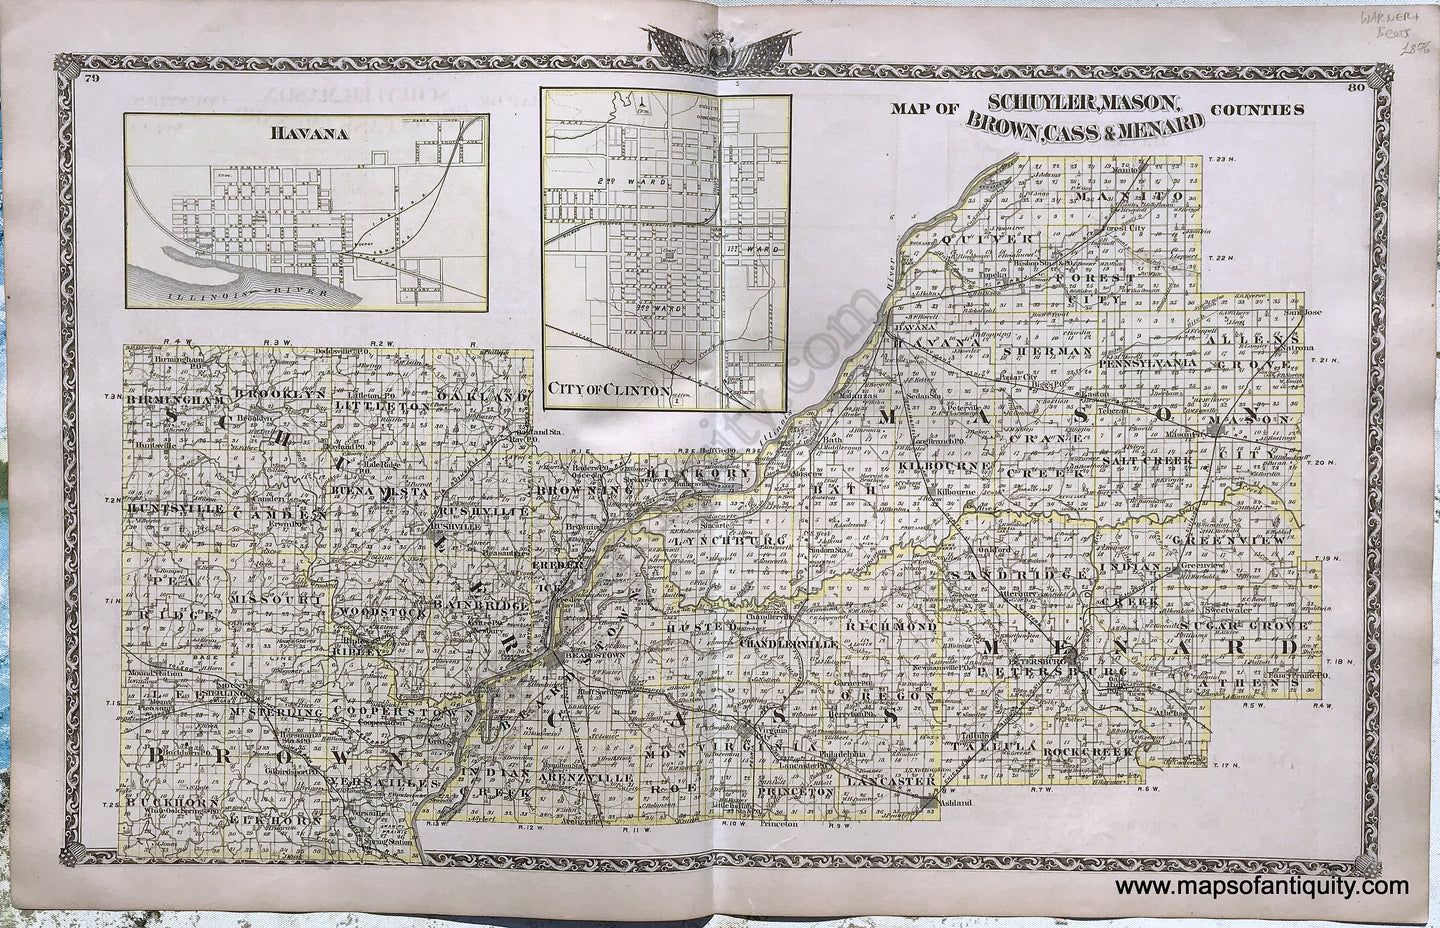 Antique-Hand-Colored-Map-Map-of-Schuyler-Mason-Brown-Cass-&-Menard-Counties;-versos:-Small-Illinois-city-maps-1876-Warner-&-Beers-/-Union-Atlas-Co.-Midwest-1800s-19th-century-Maps-of-Antiquity